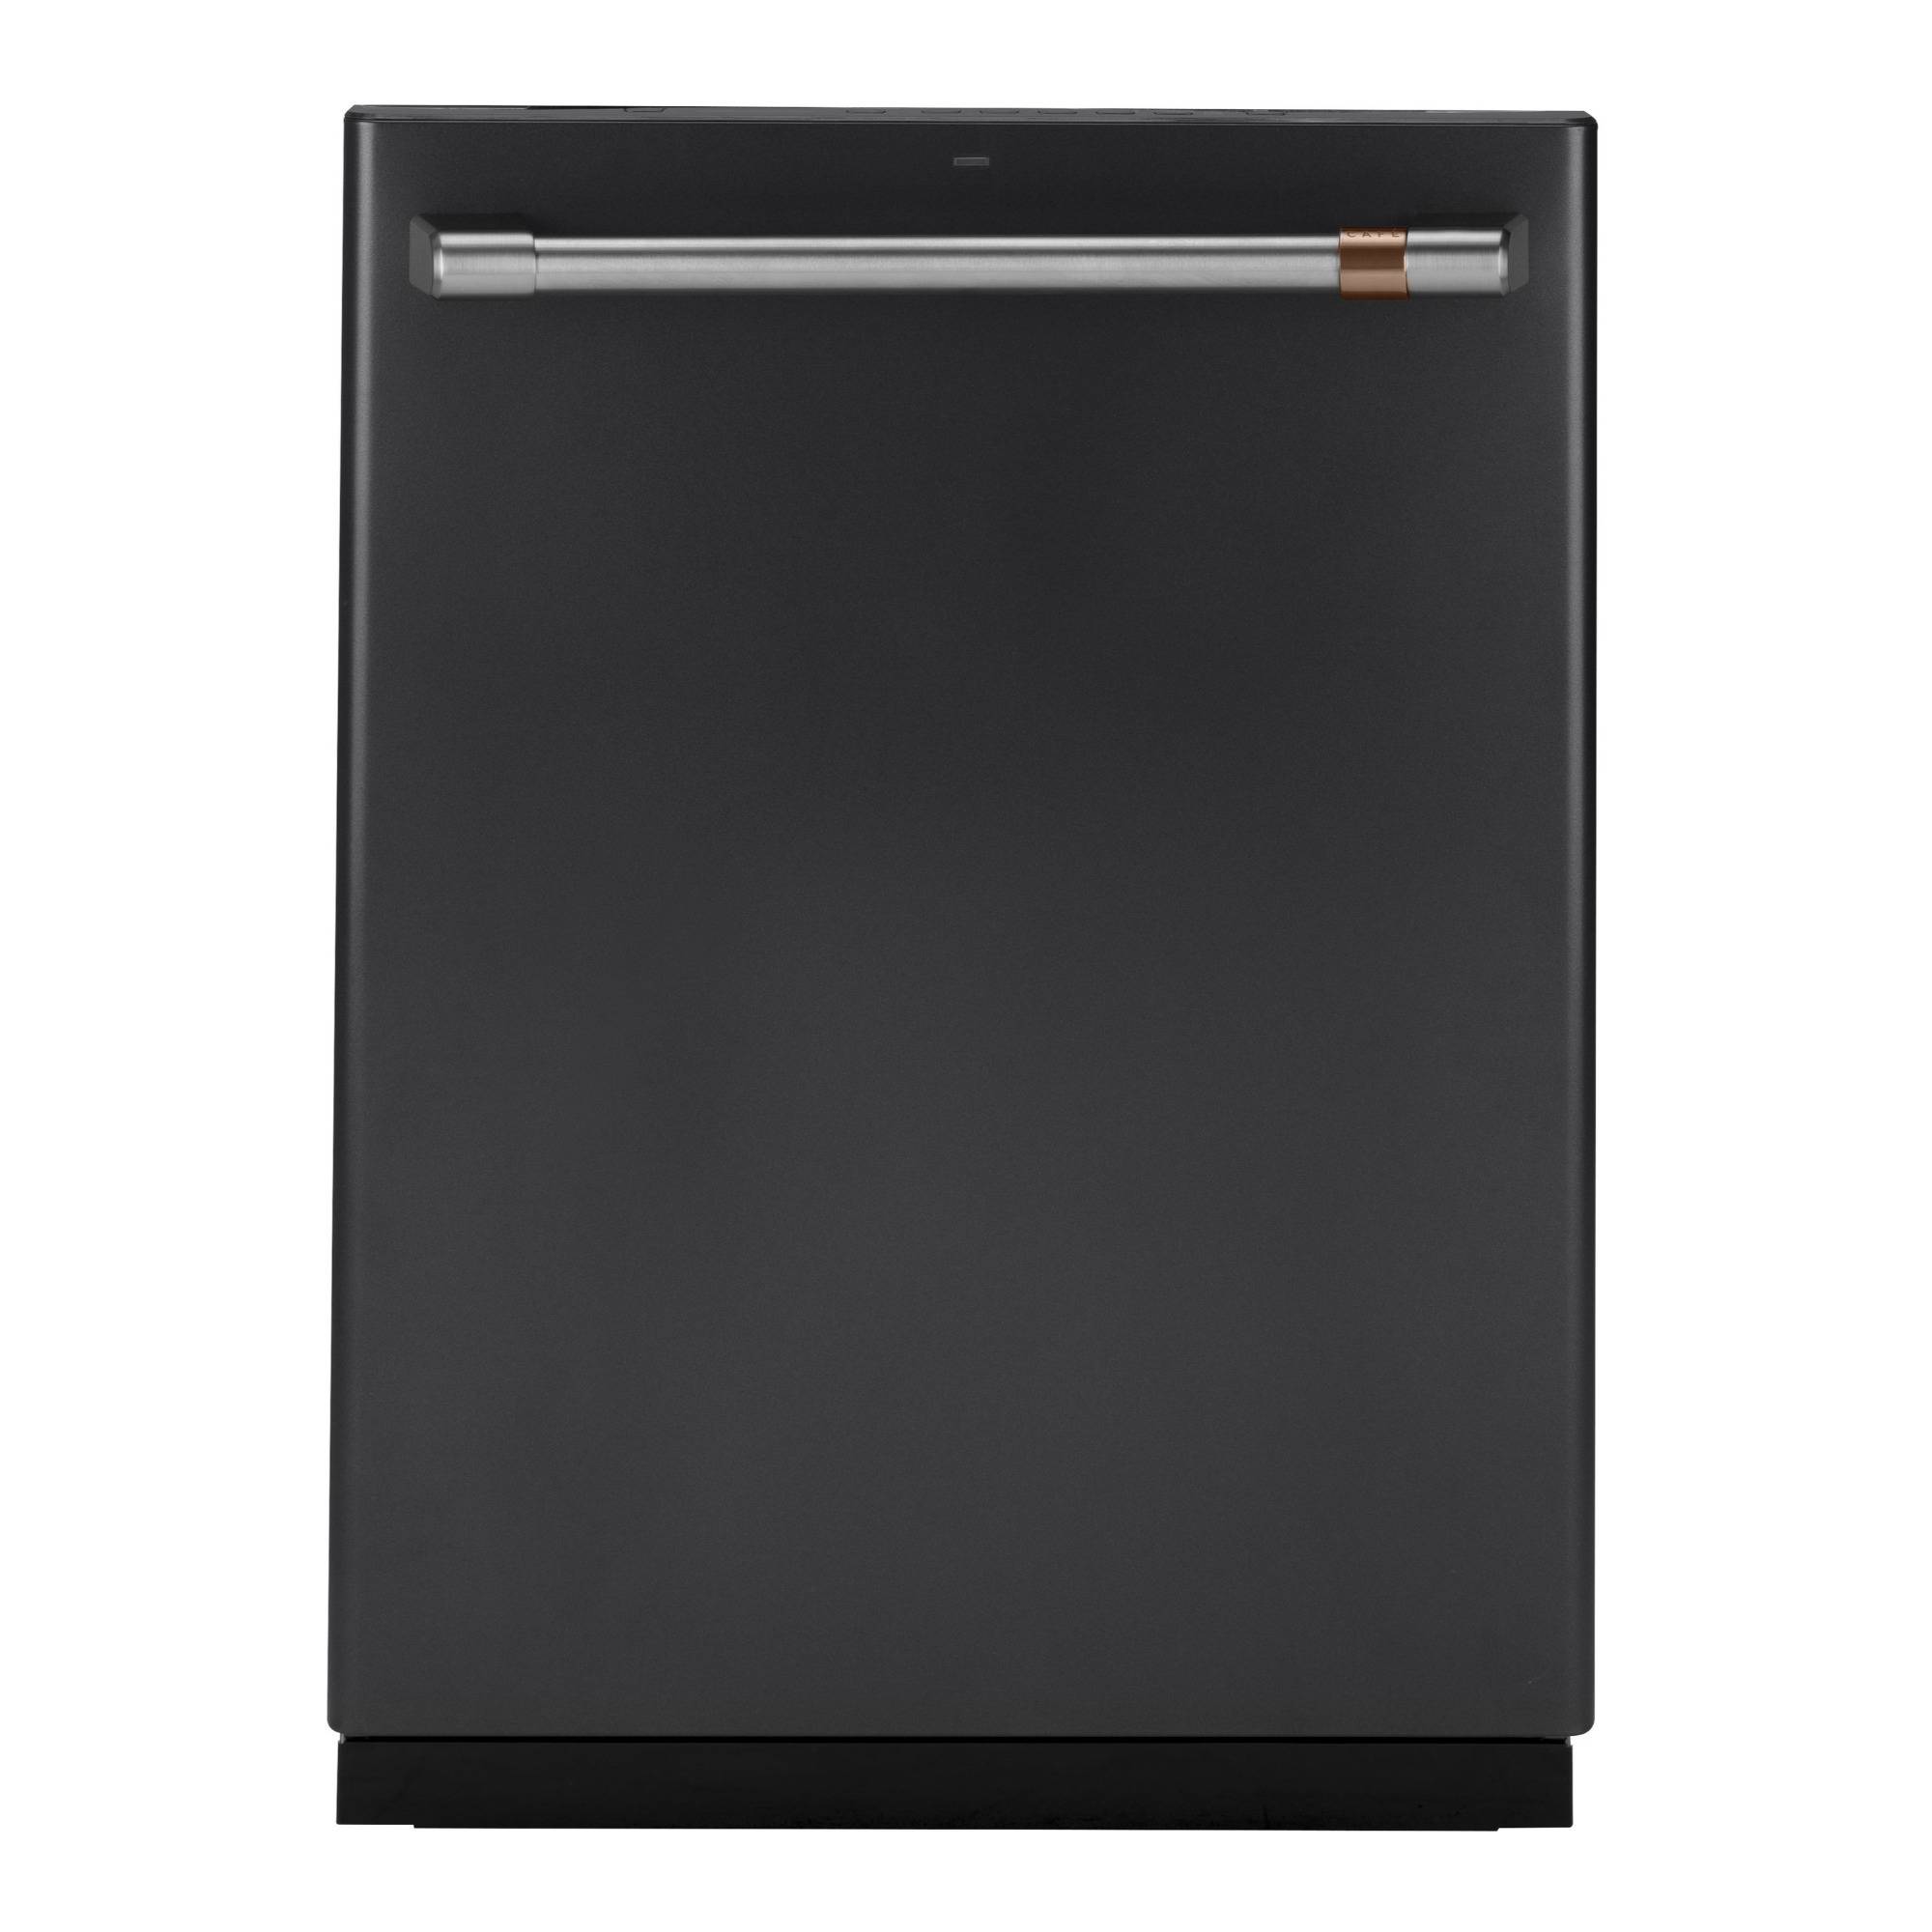 Cafe Café™ Stainless Interior Built-In Dishwasher with Hidden Controls (Matte Black)